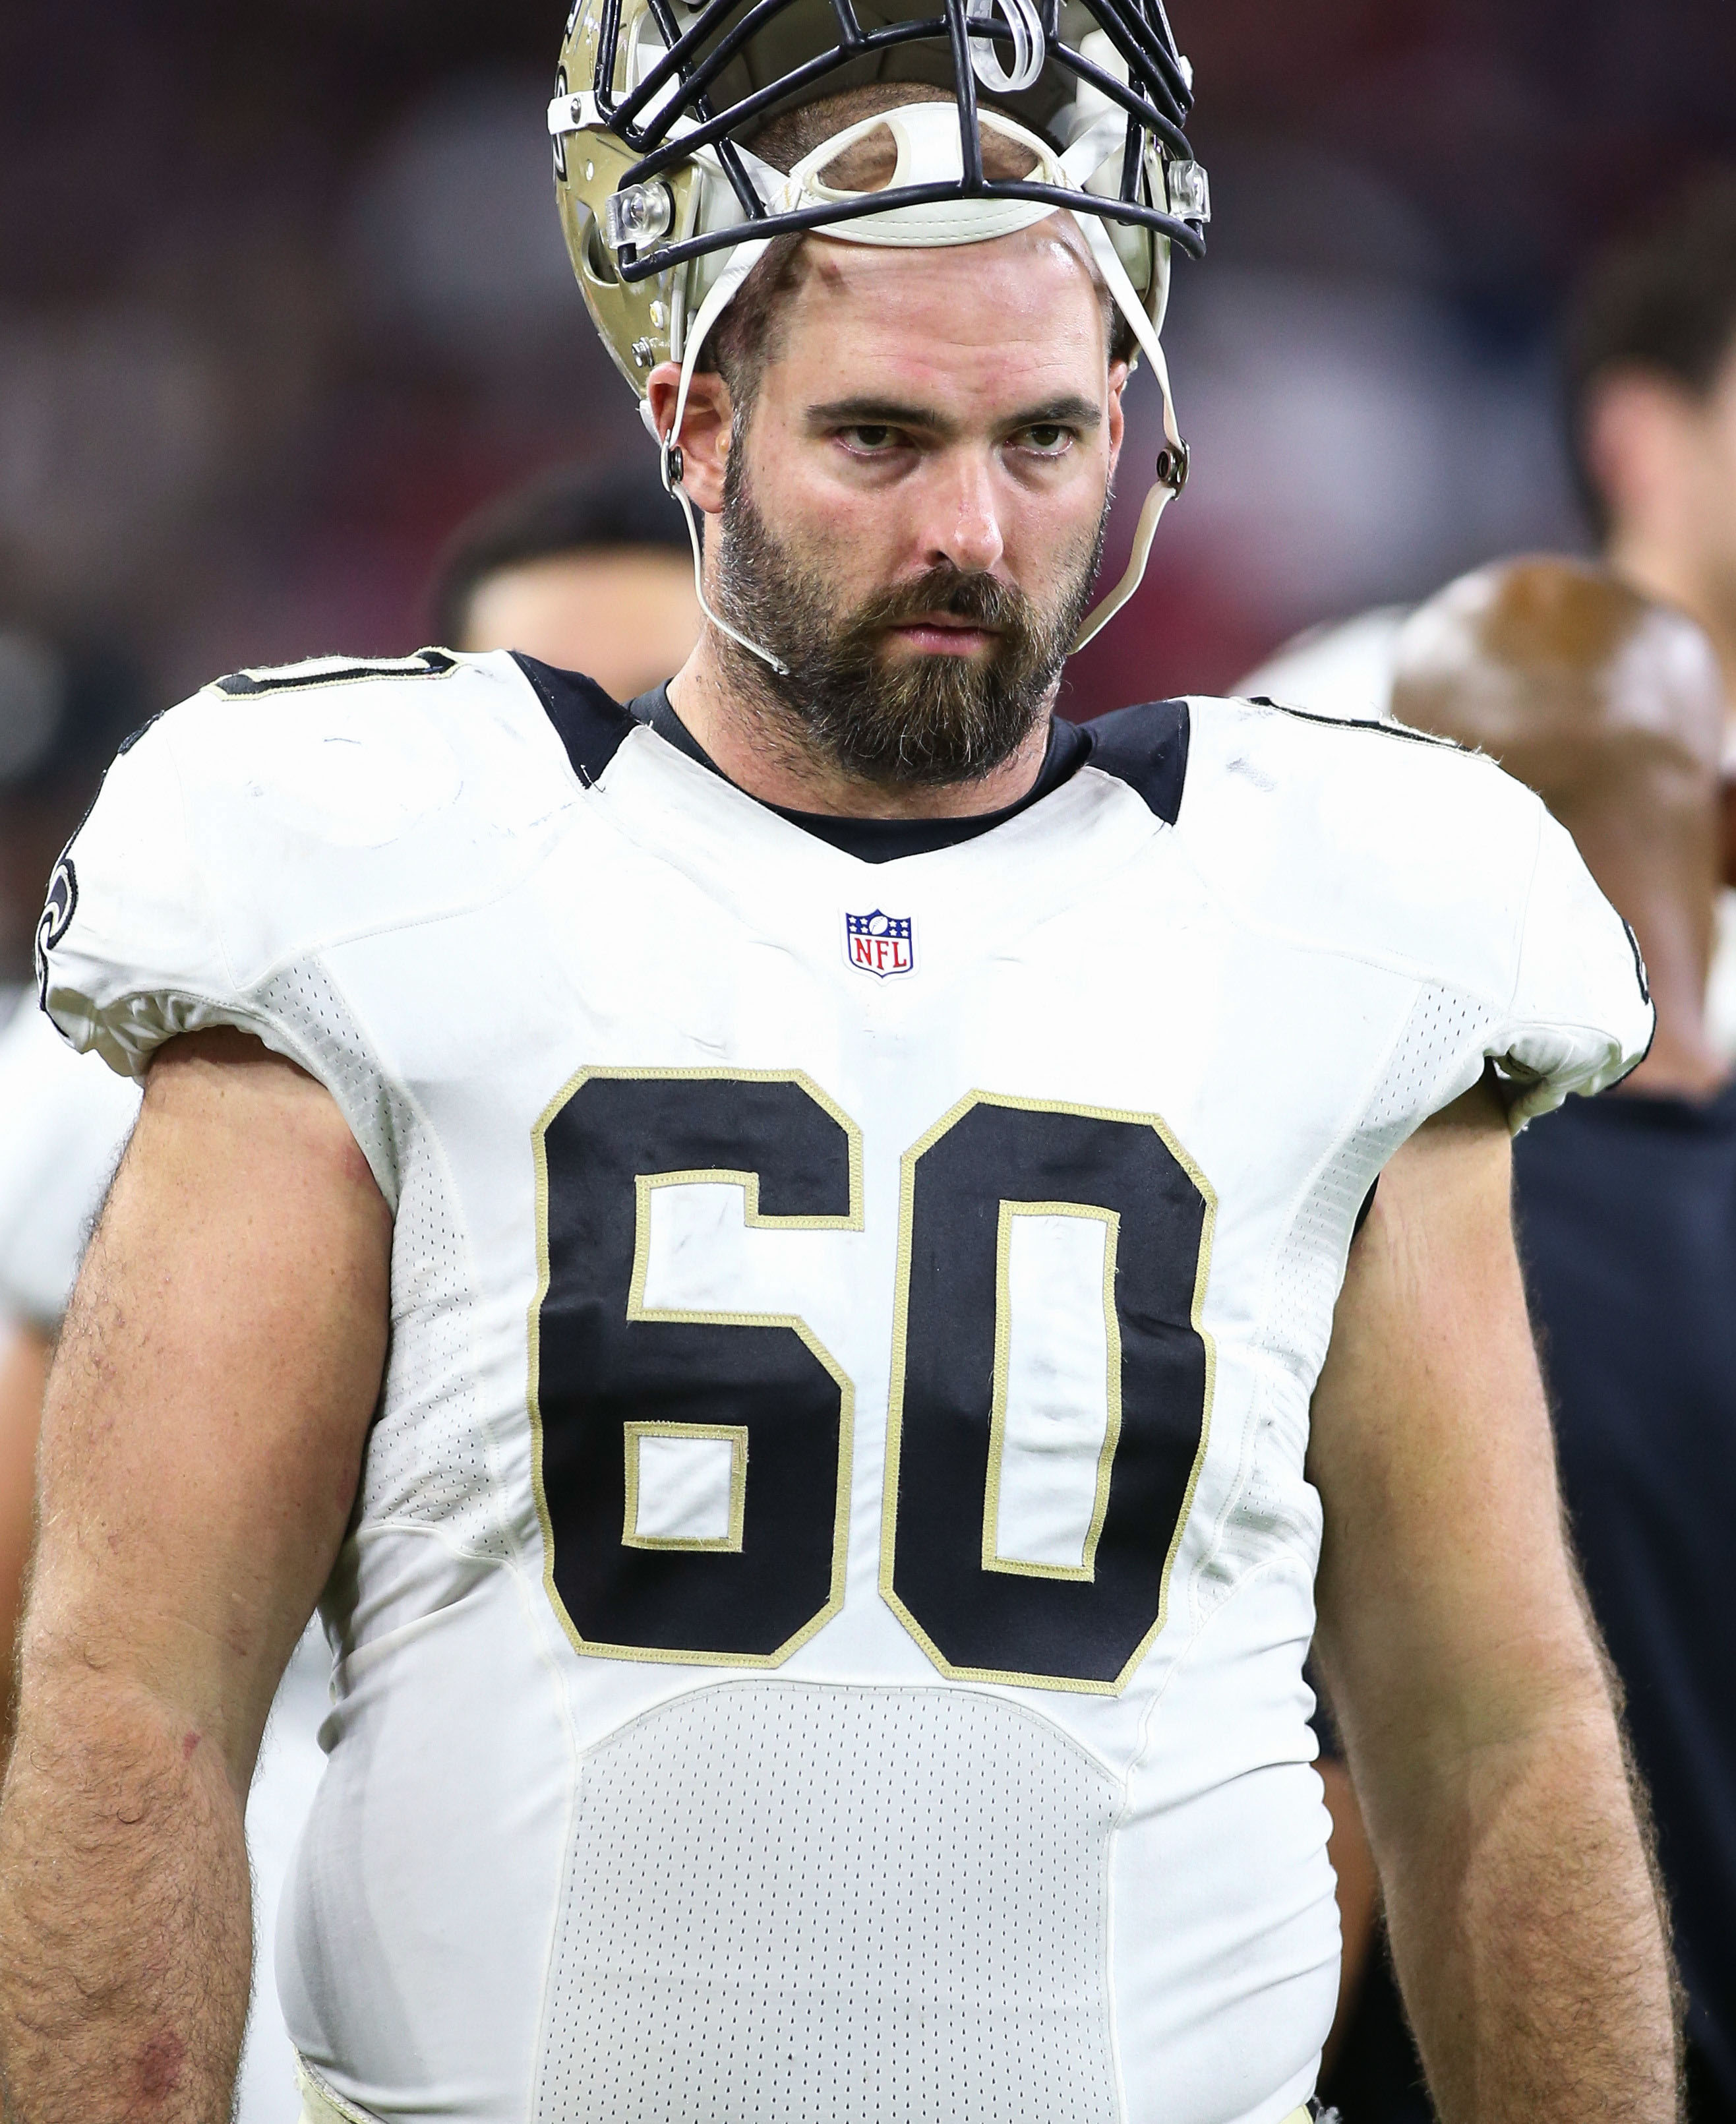 Saints' Max Unger To Be Ready For Week 1?